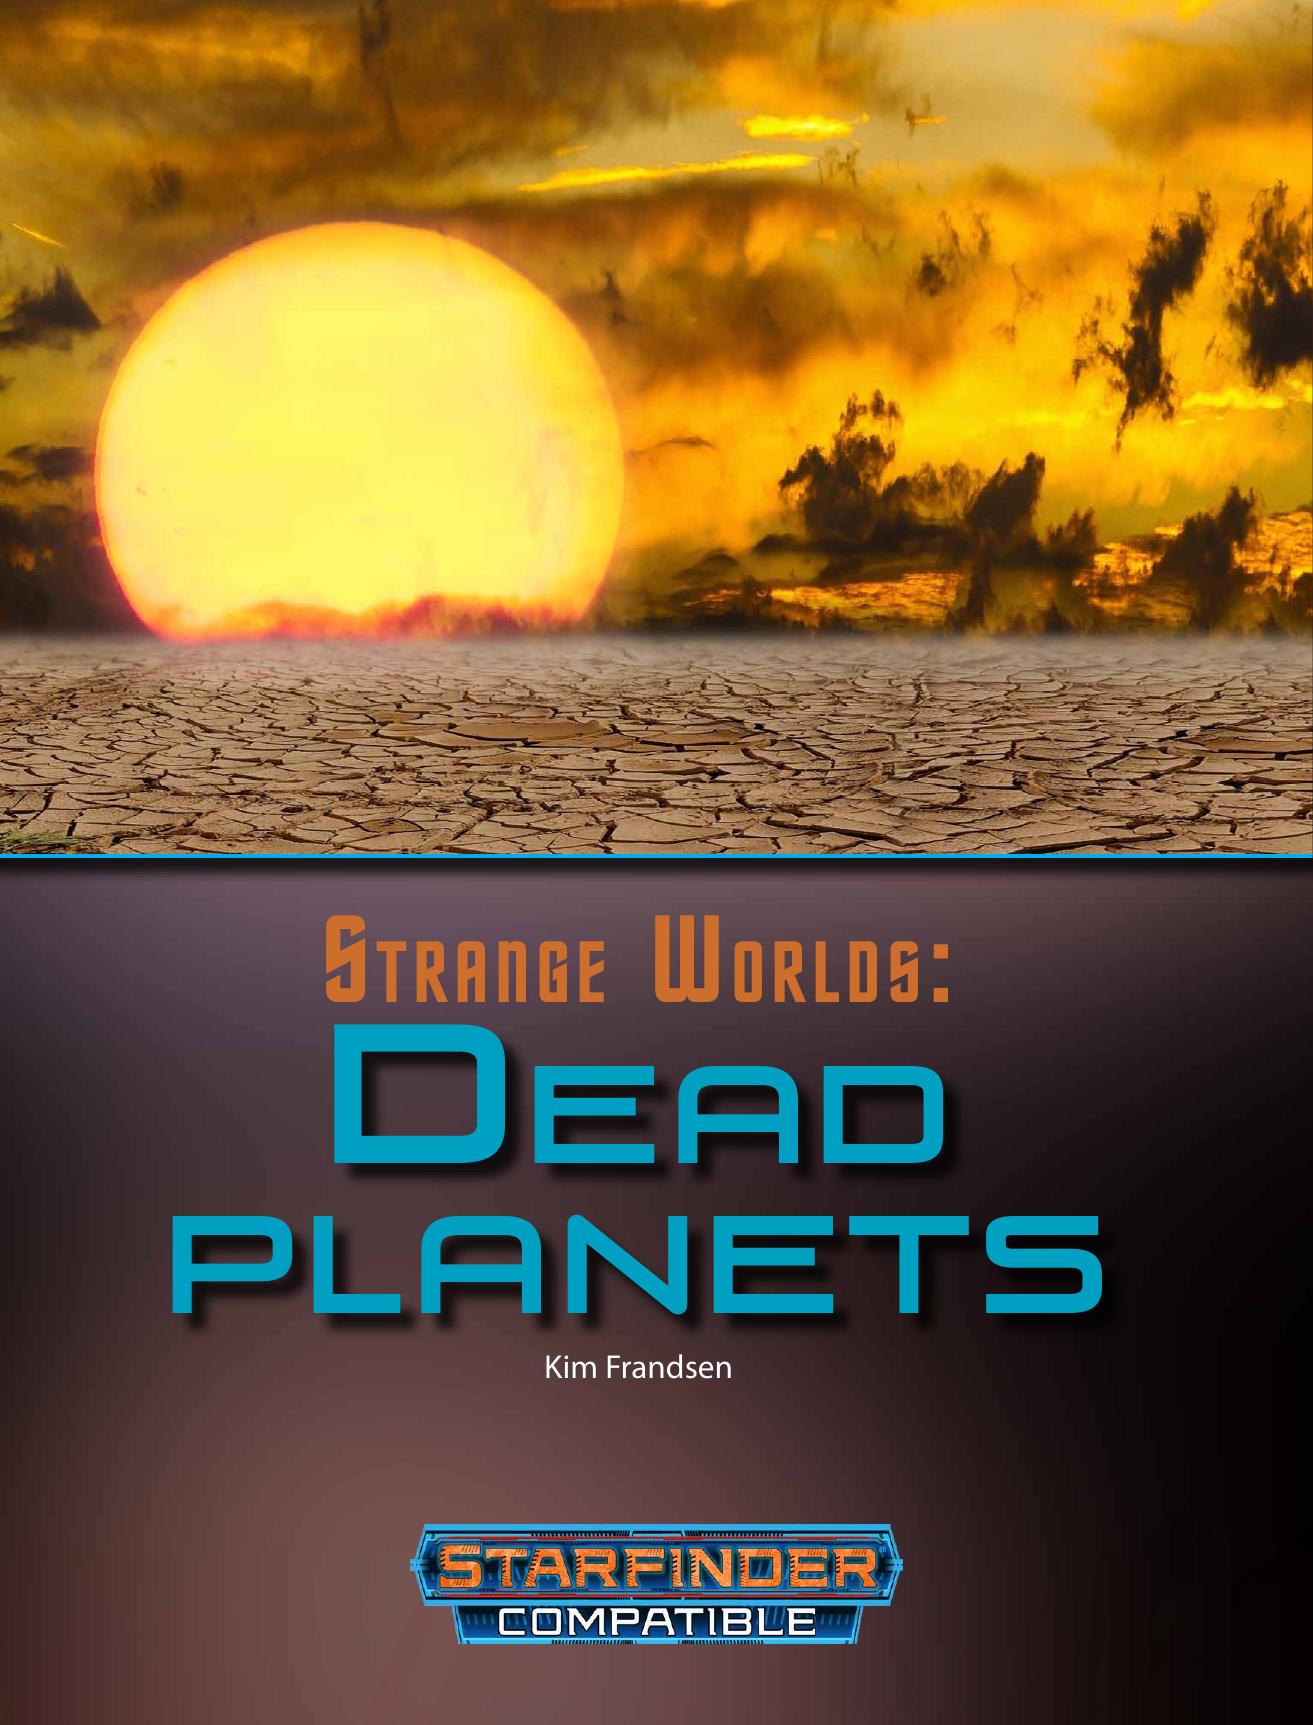 Dead Planets